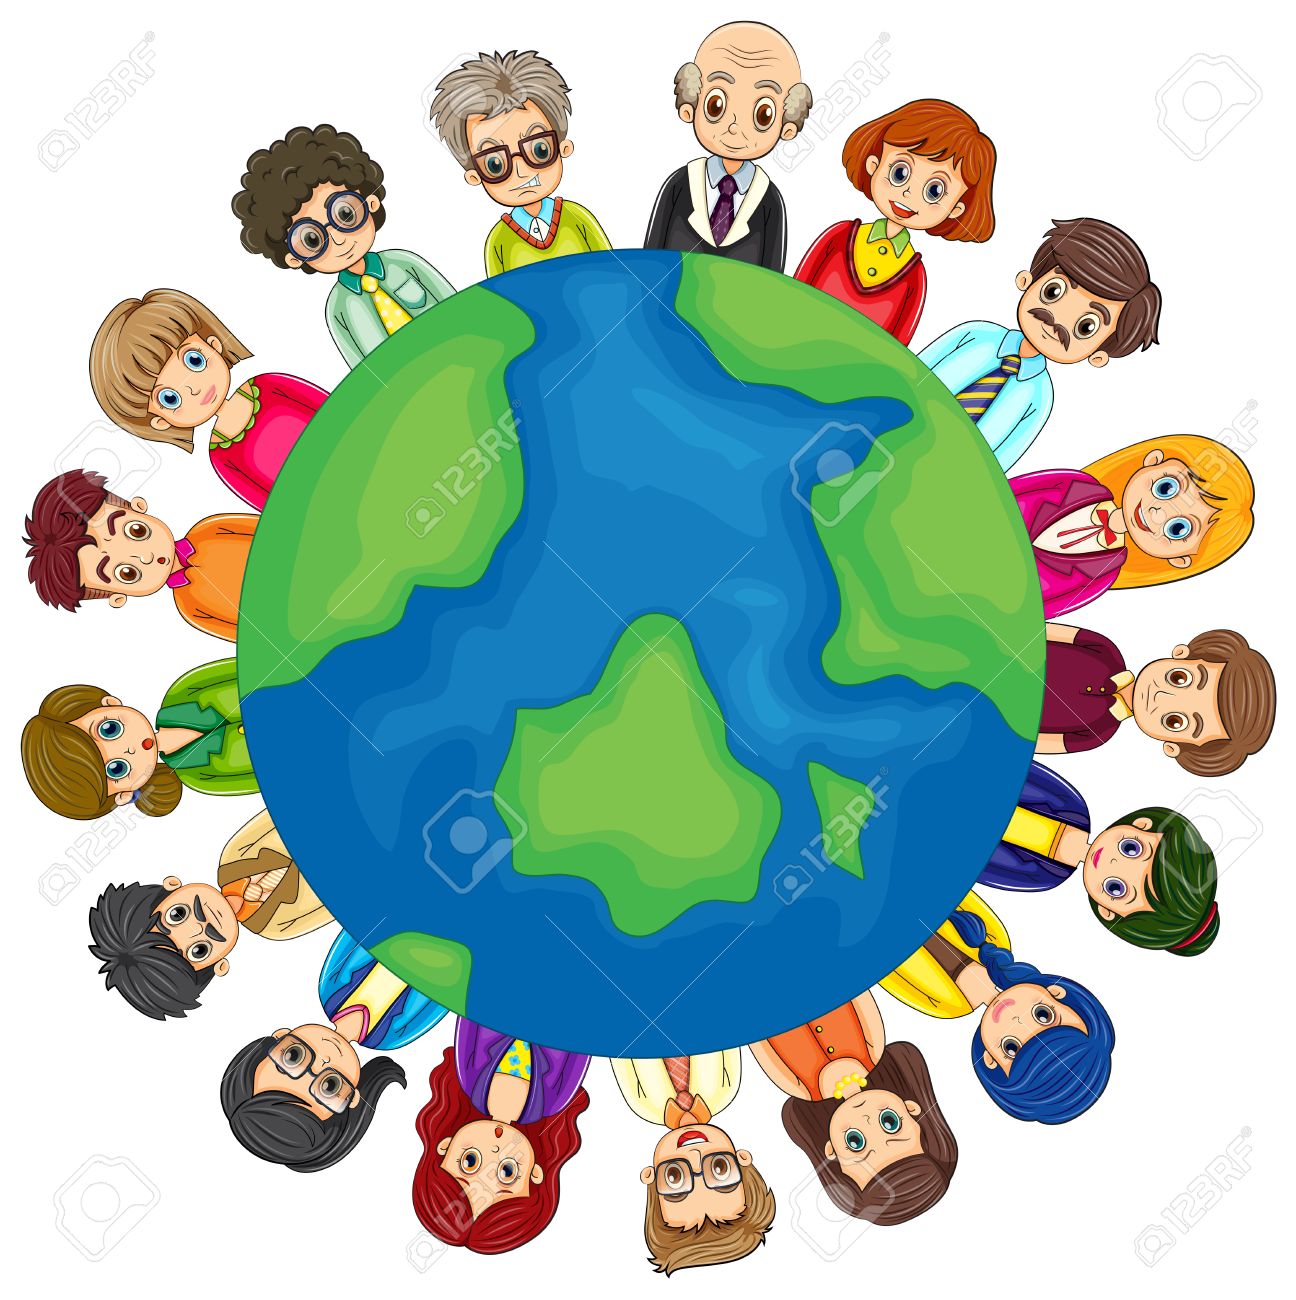 Clipart People Around The World.